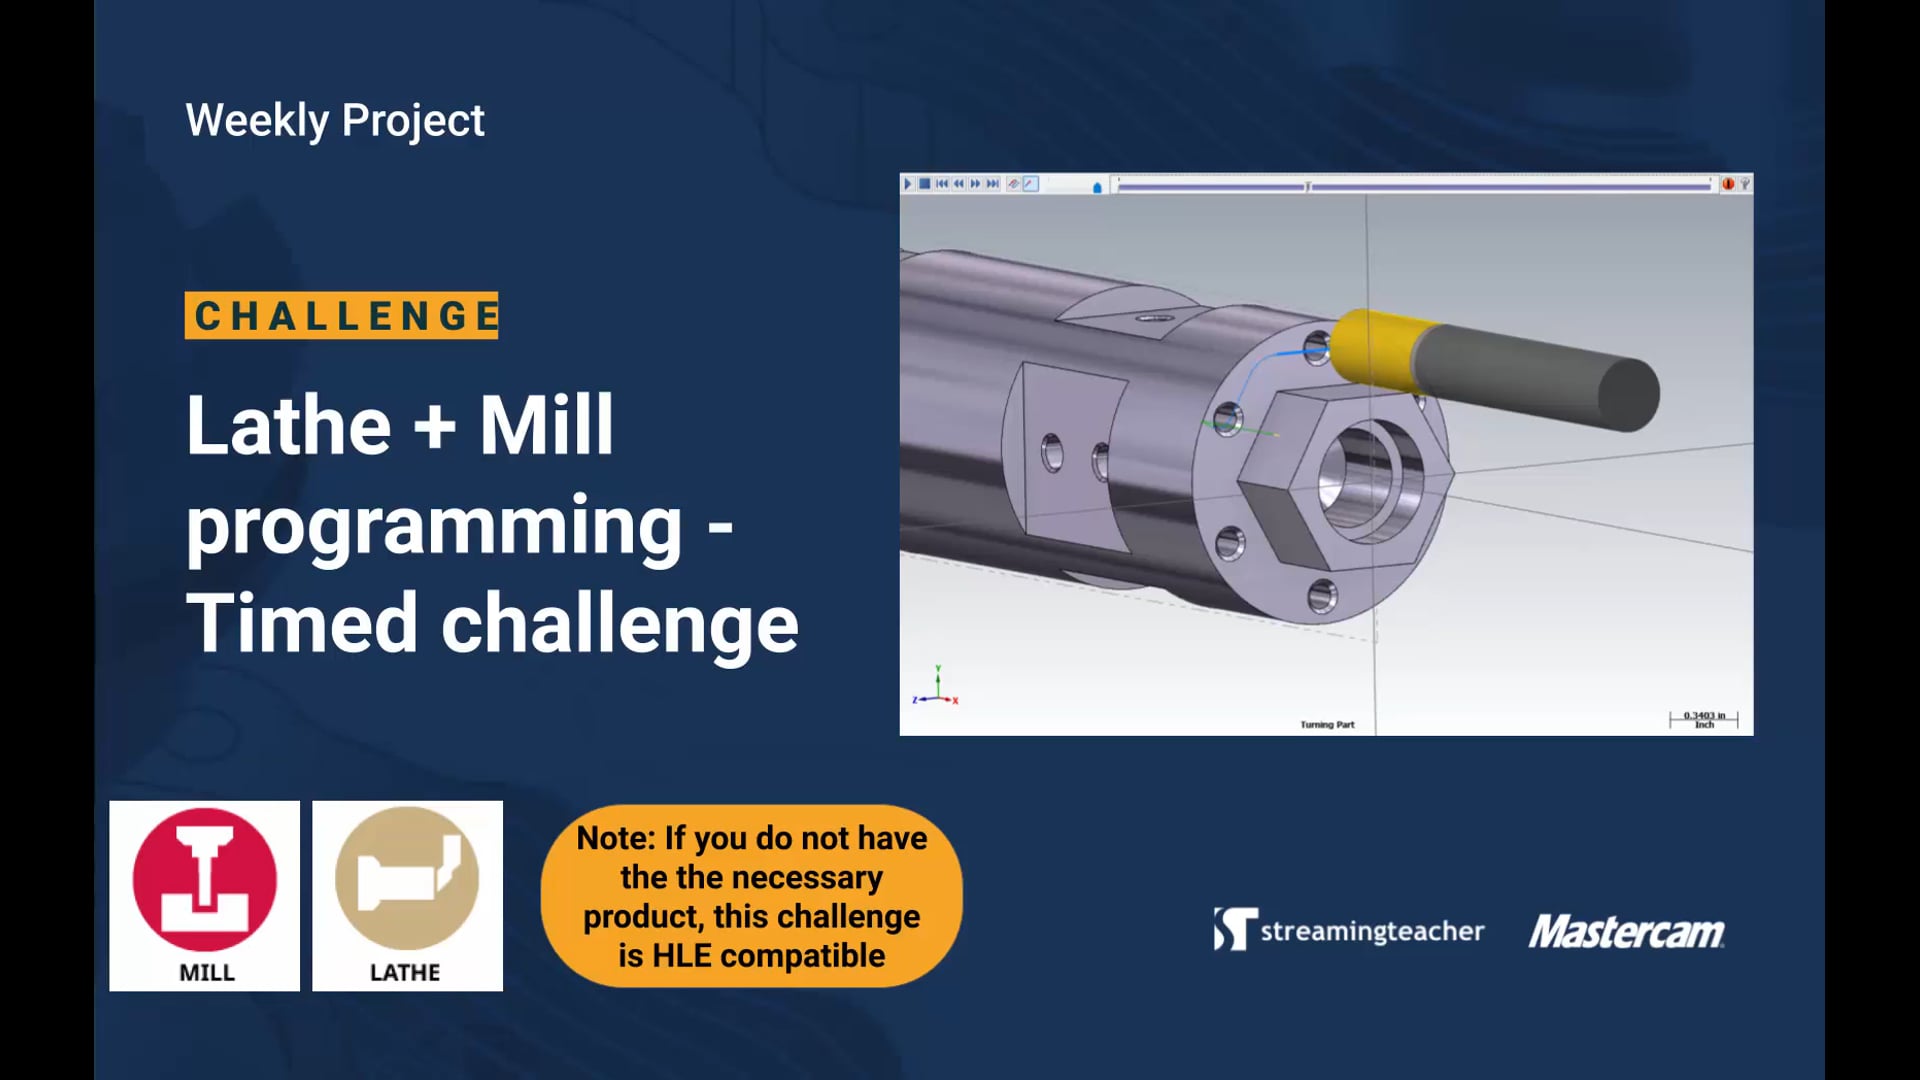 Lathe + Mill programming - Timed challenge